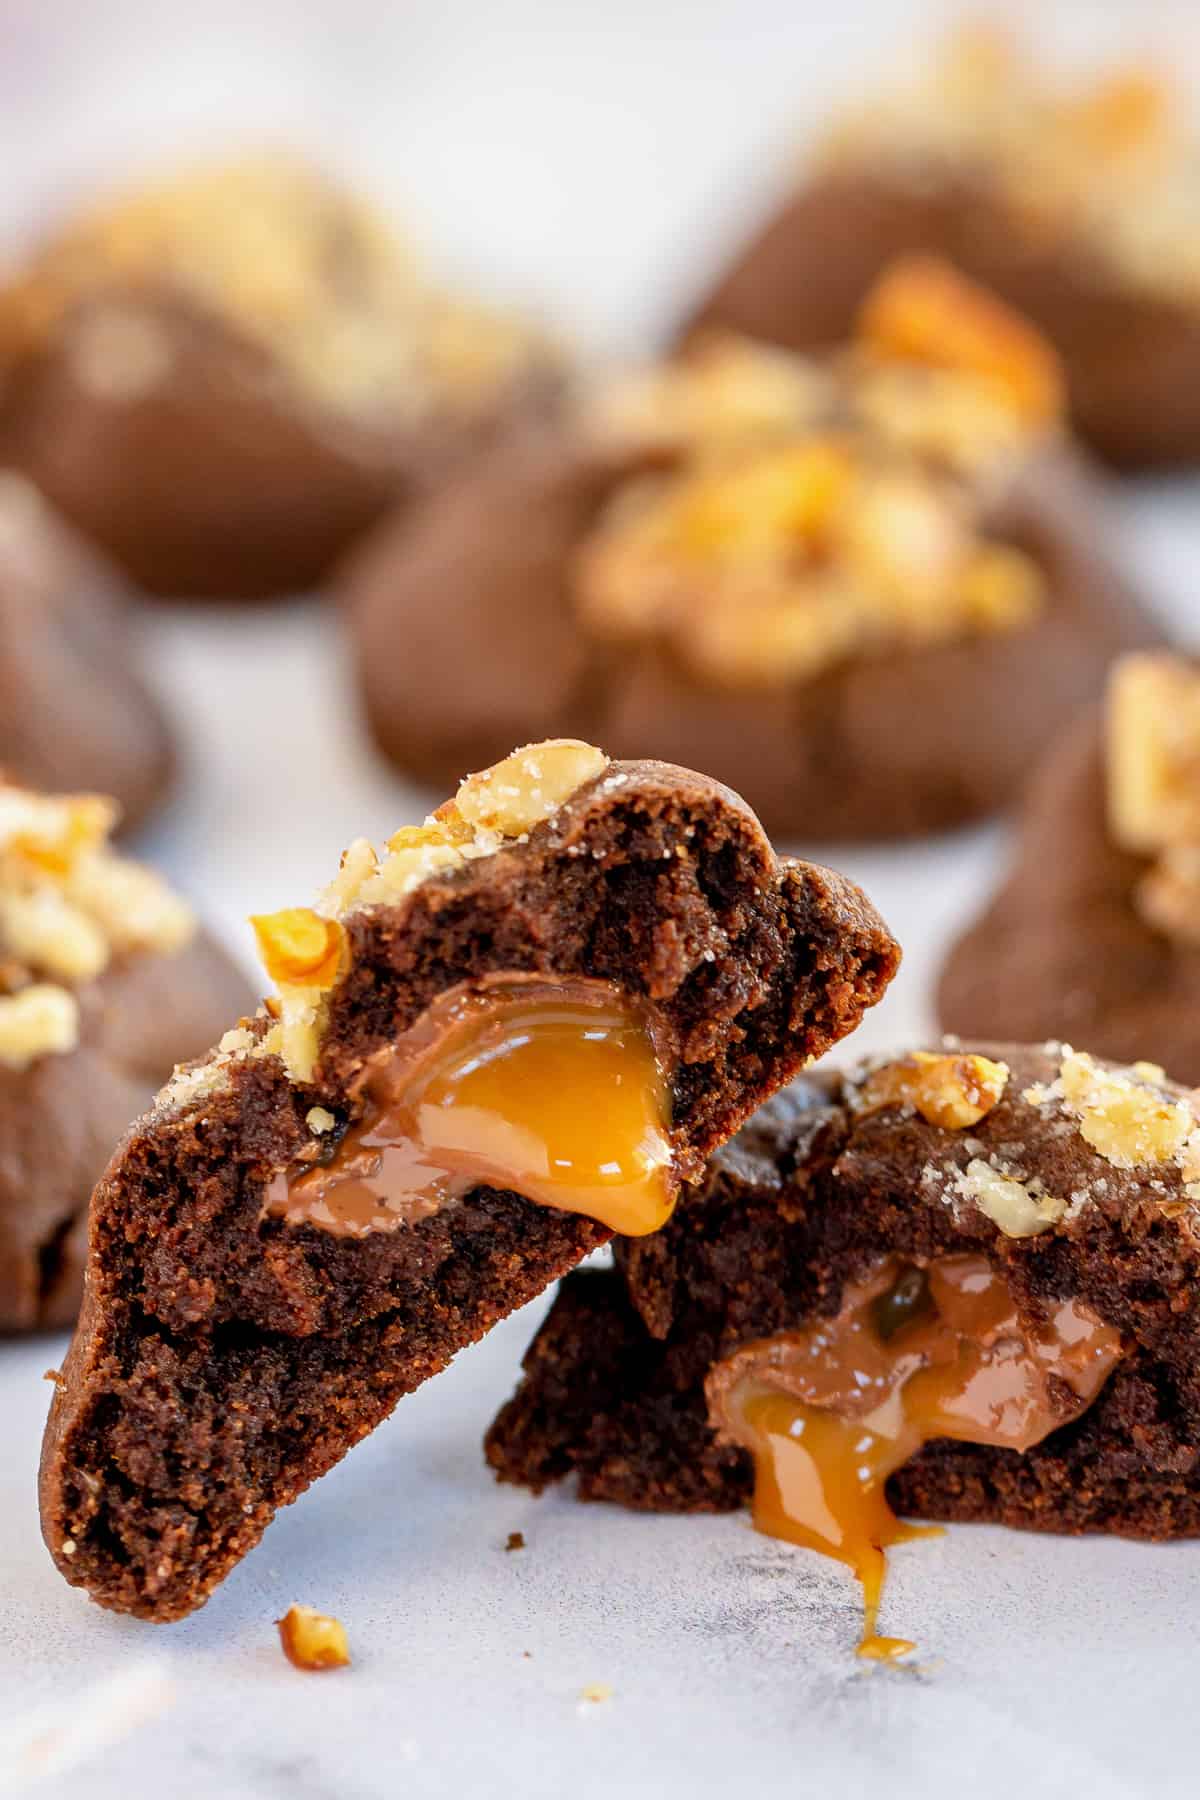 A chocolate cookies cut in half with caramel oozing out.